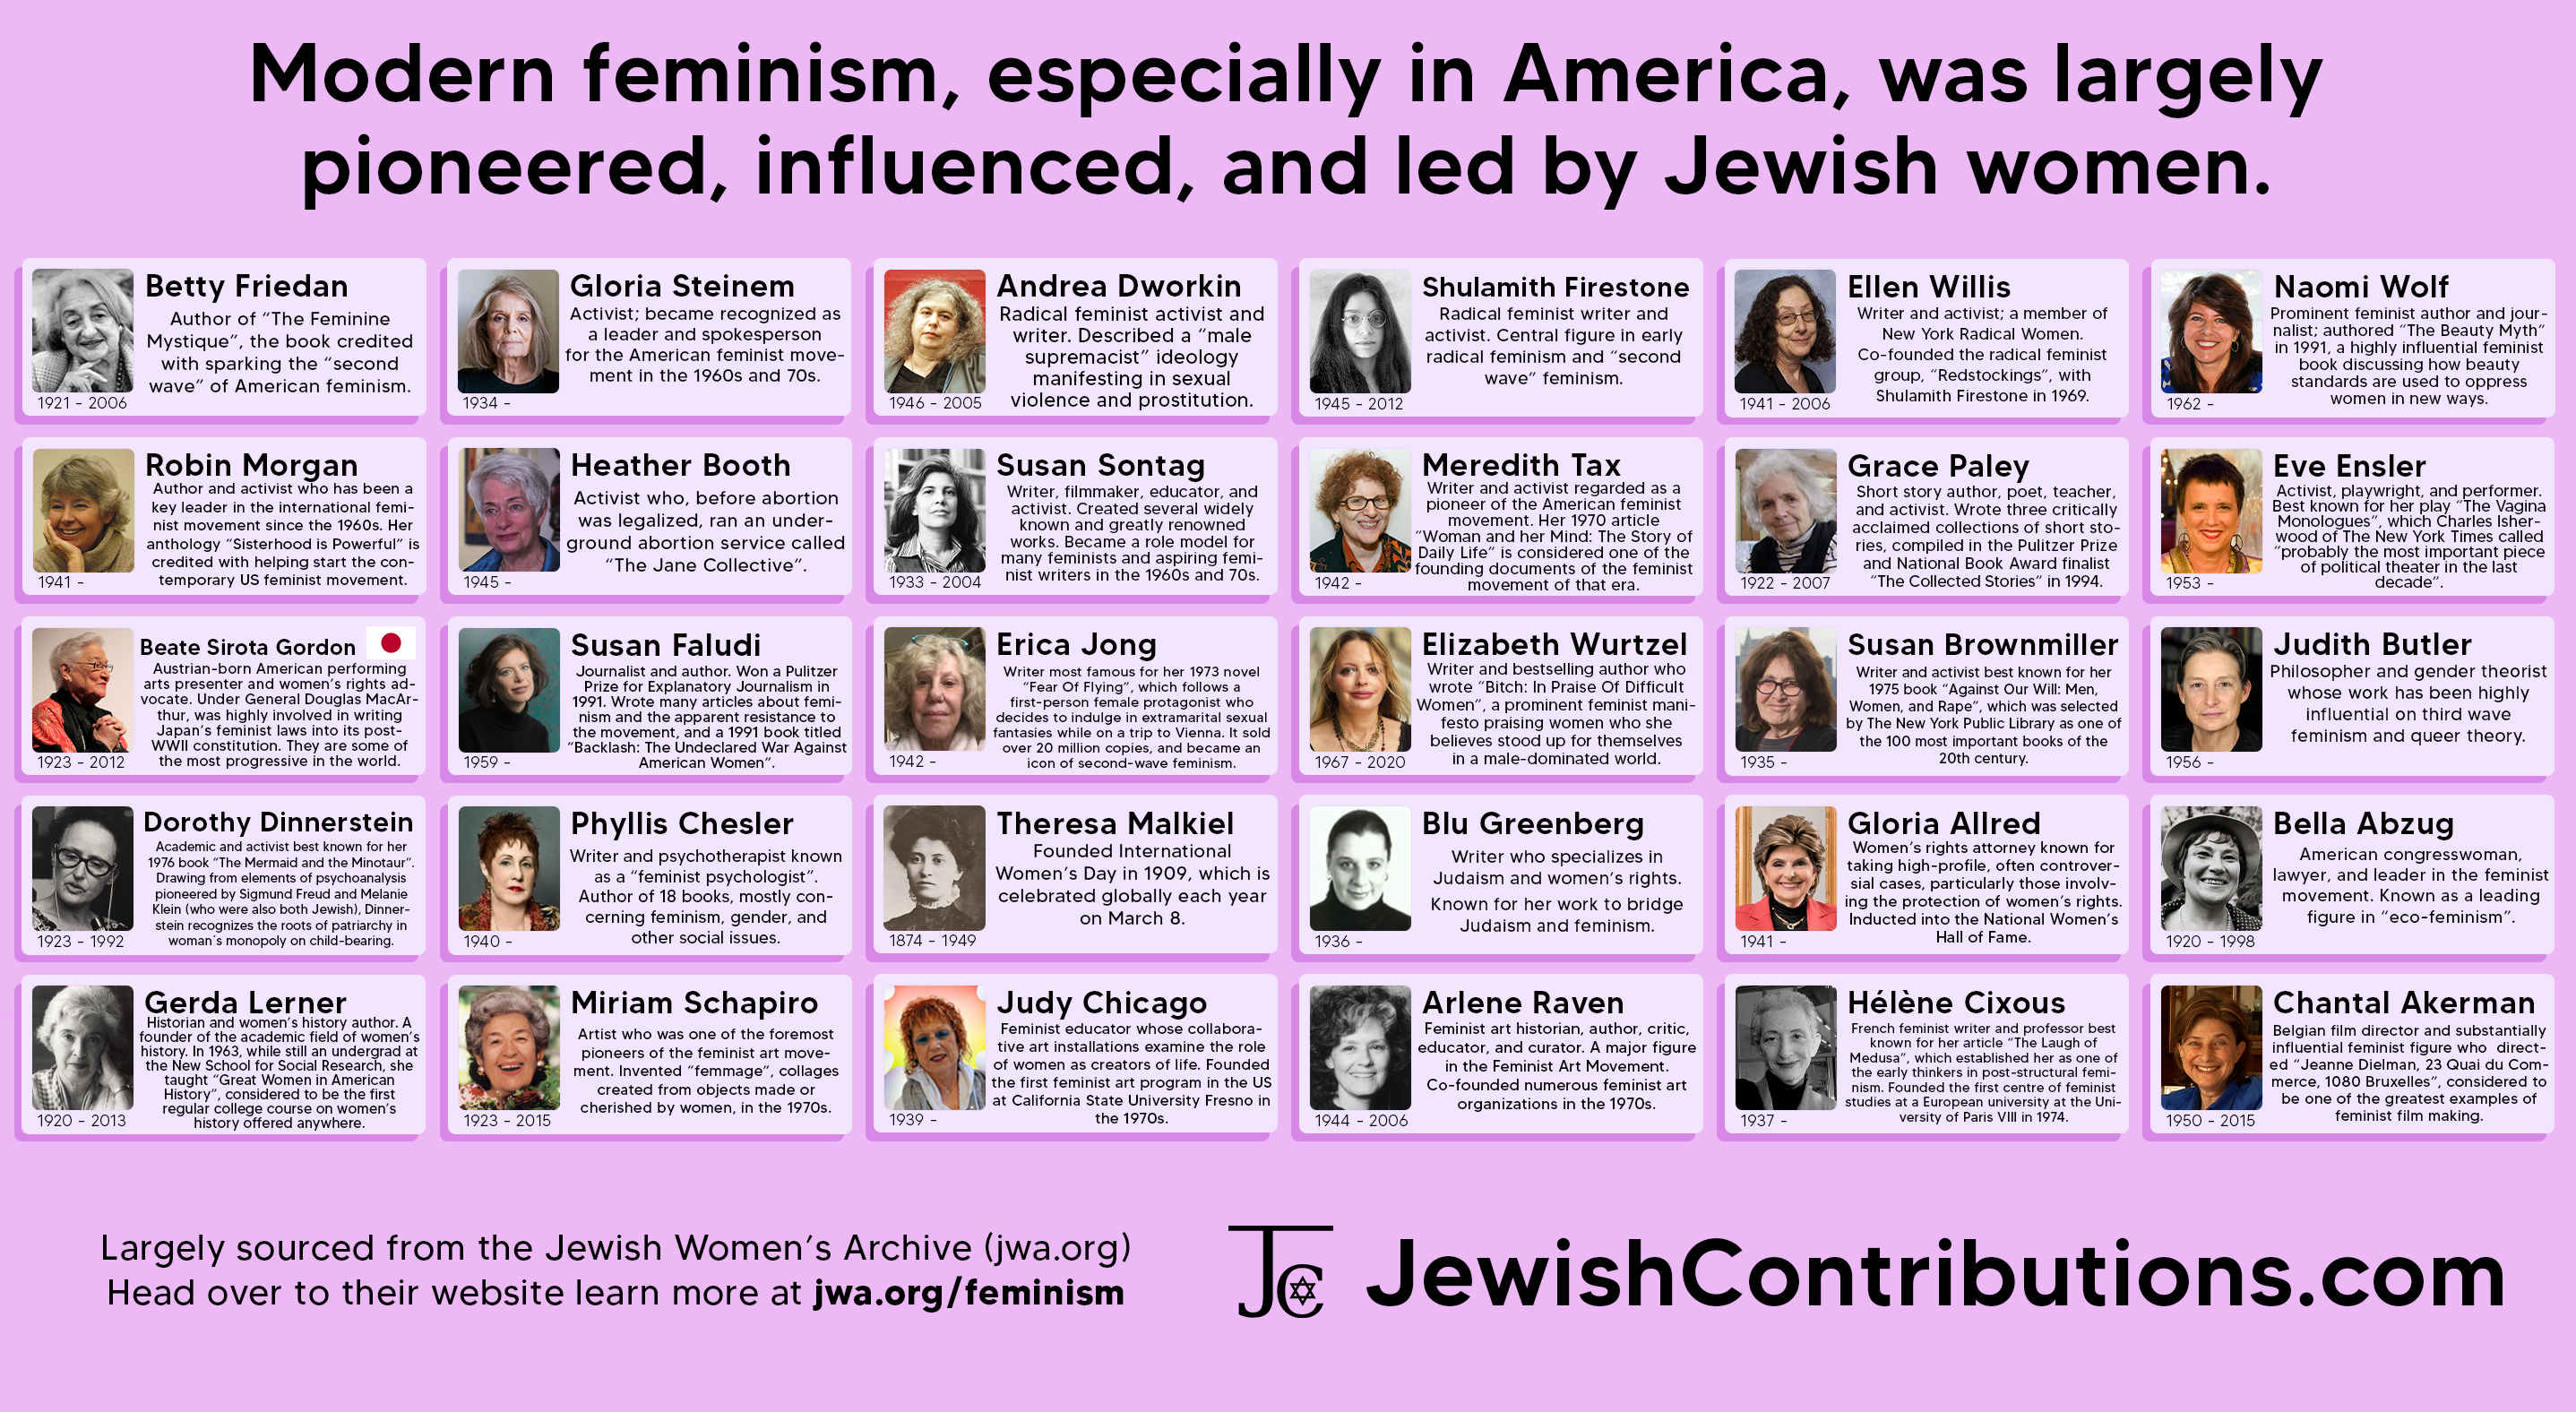 American feminism, especially “second wave feminism”, was largely influenced and led by Jewish women.